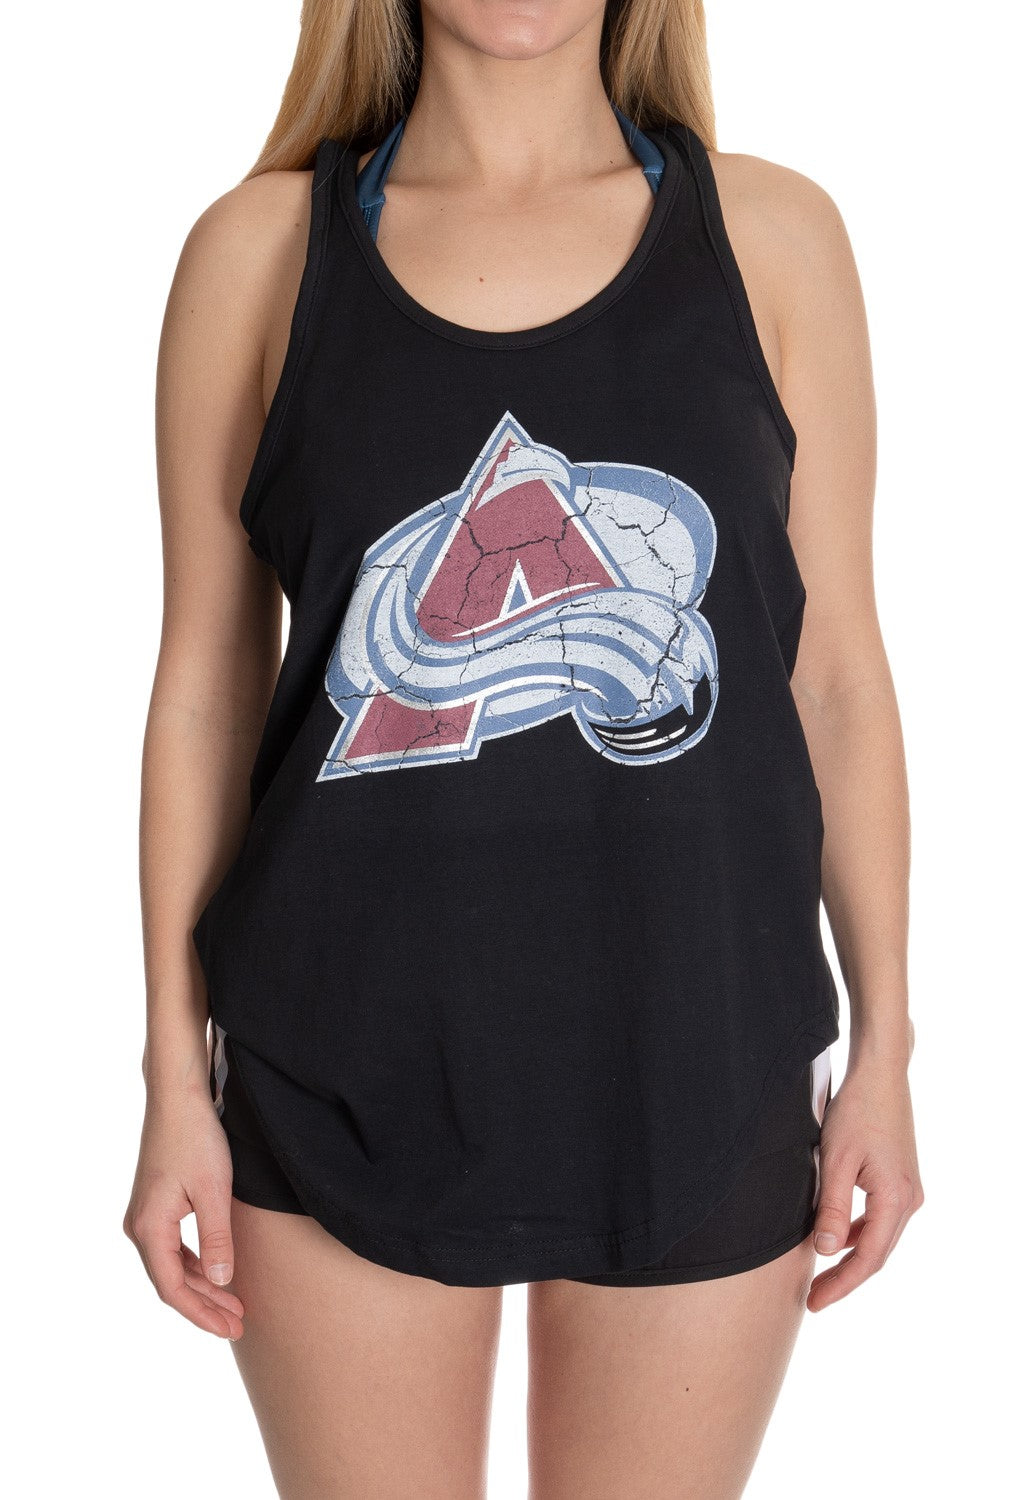 Colorado avalanche burgundy western conference champions shirt, hoodie,  sweater, long sleeve and tank top